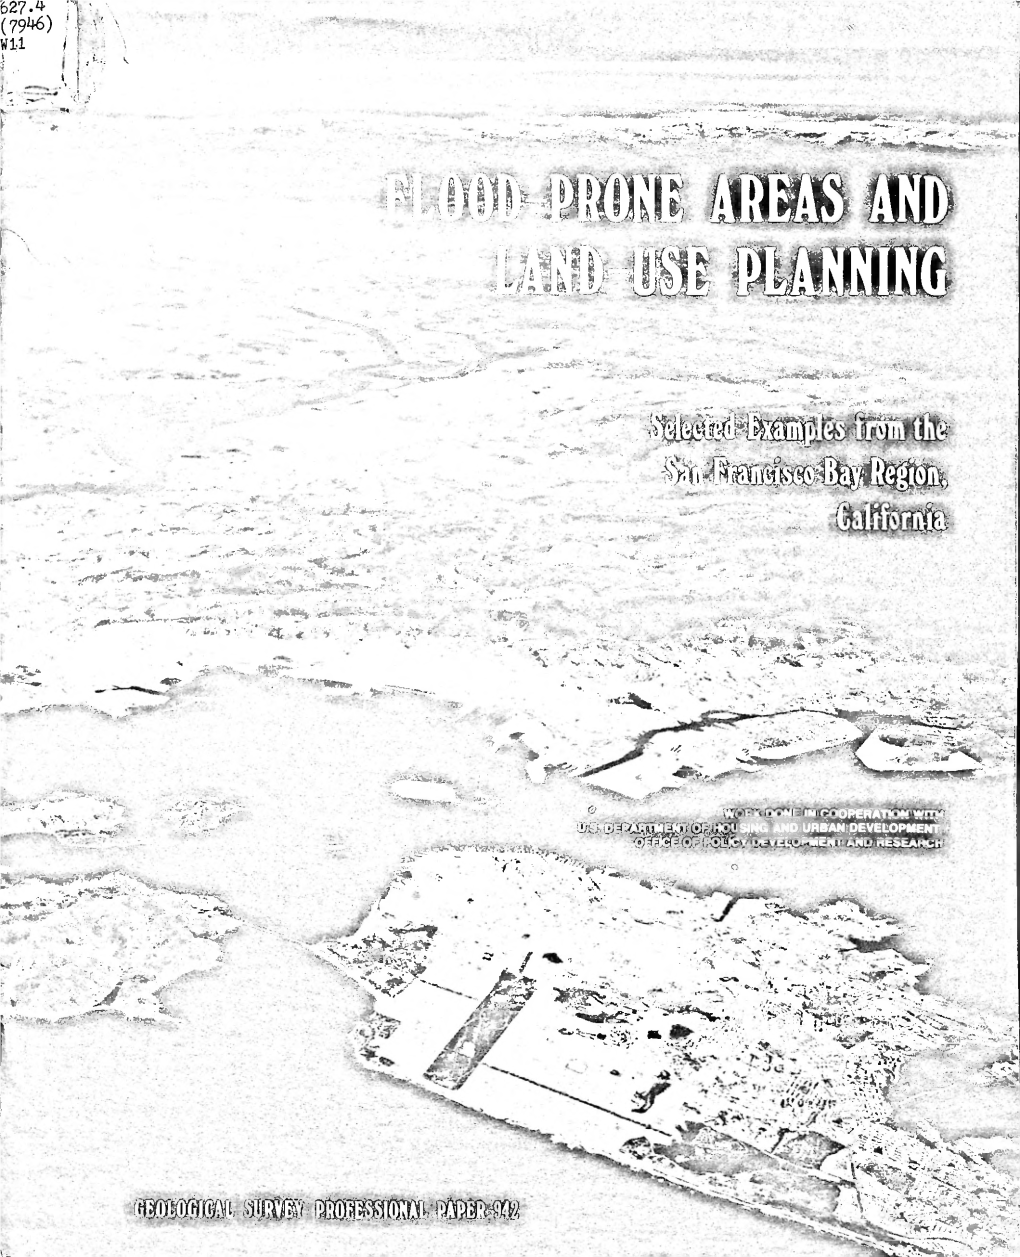 Flood Prone Areas and Land Use Planning